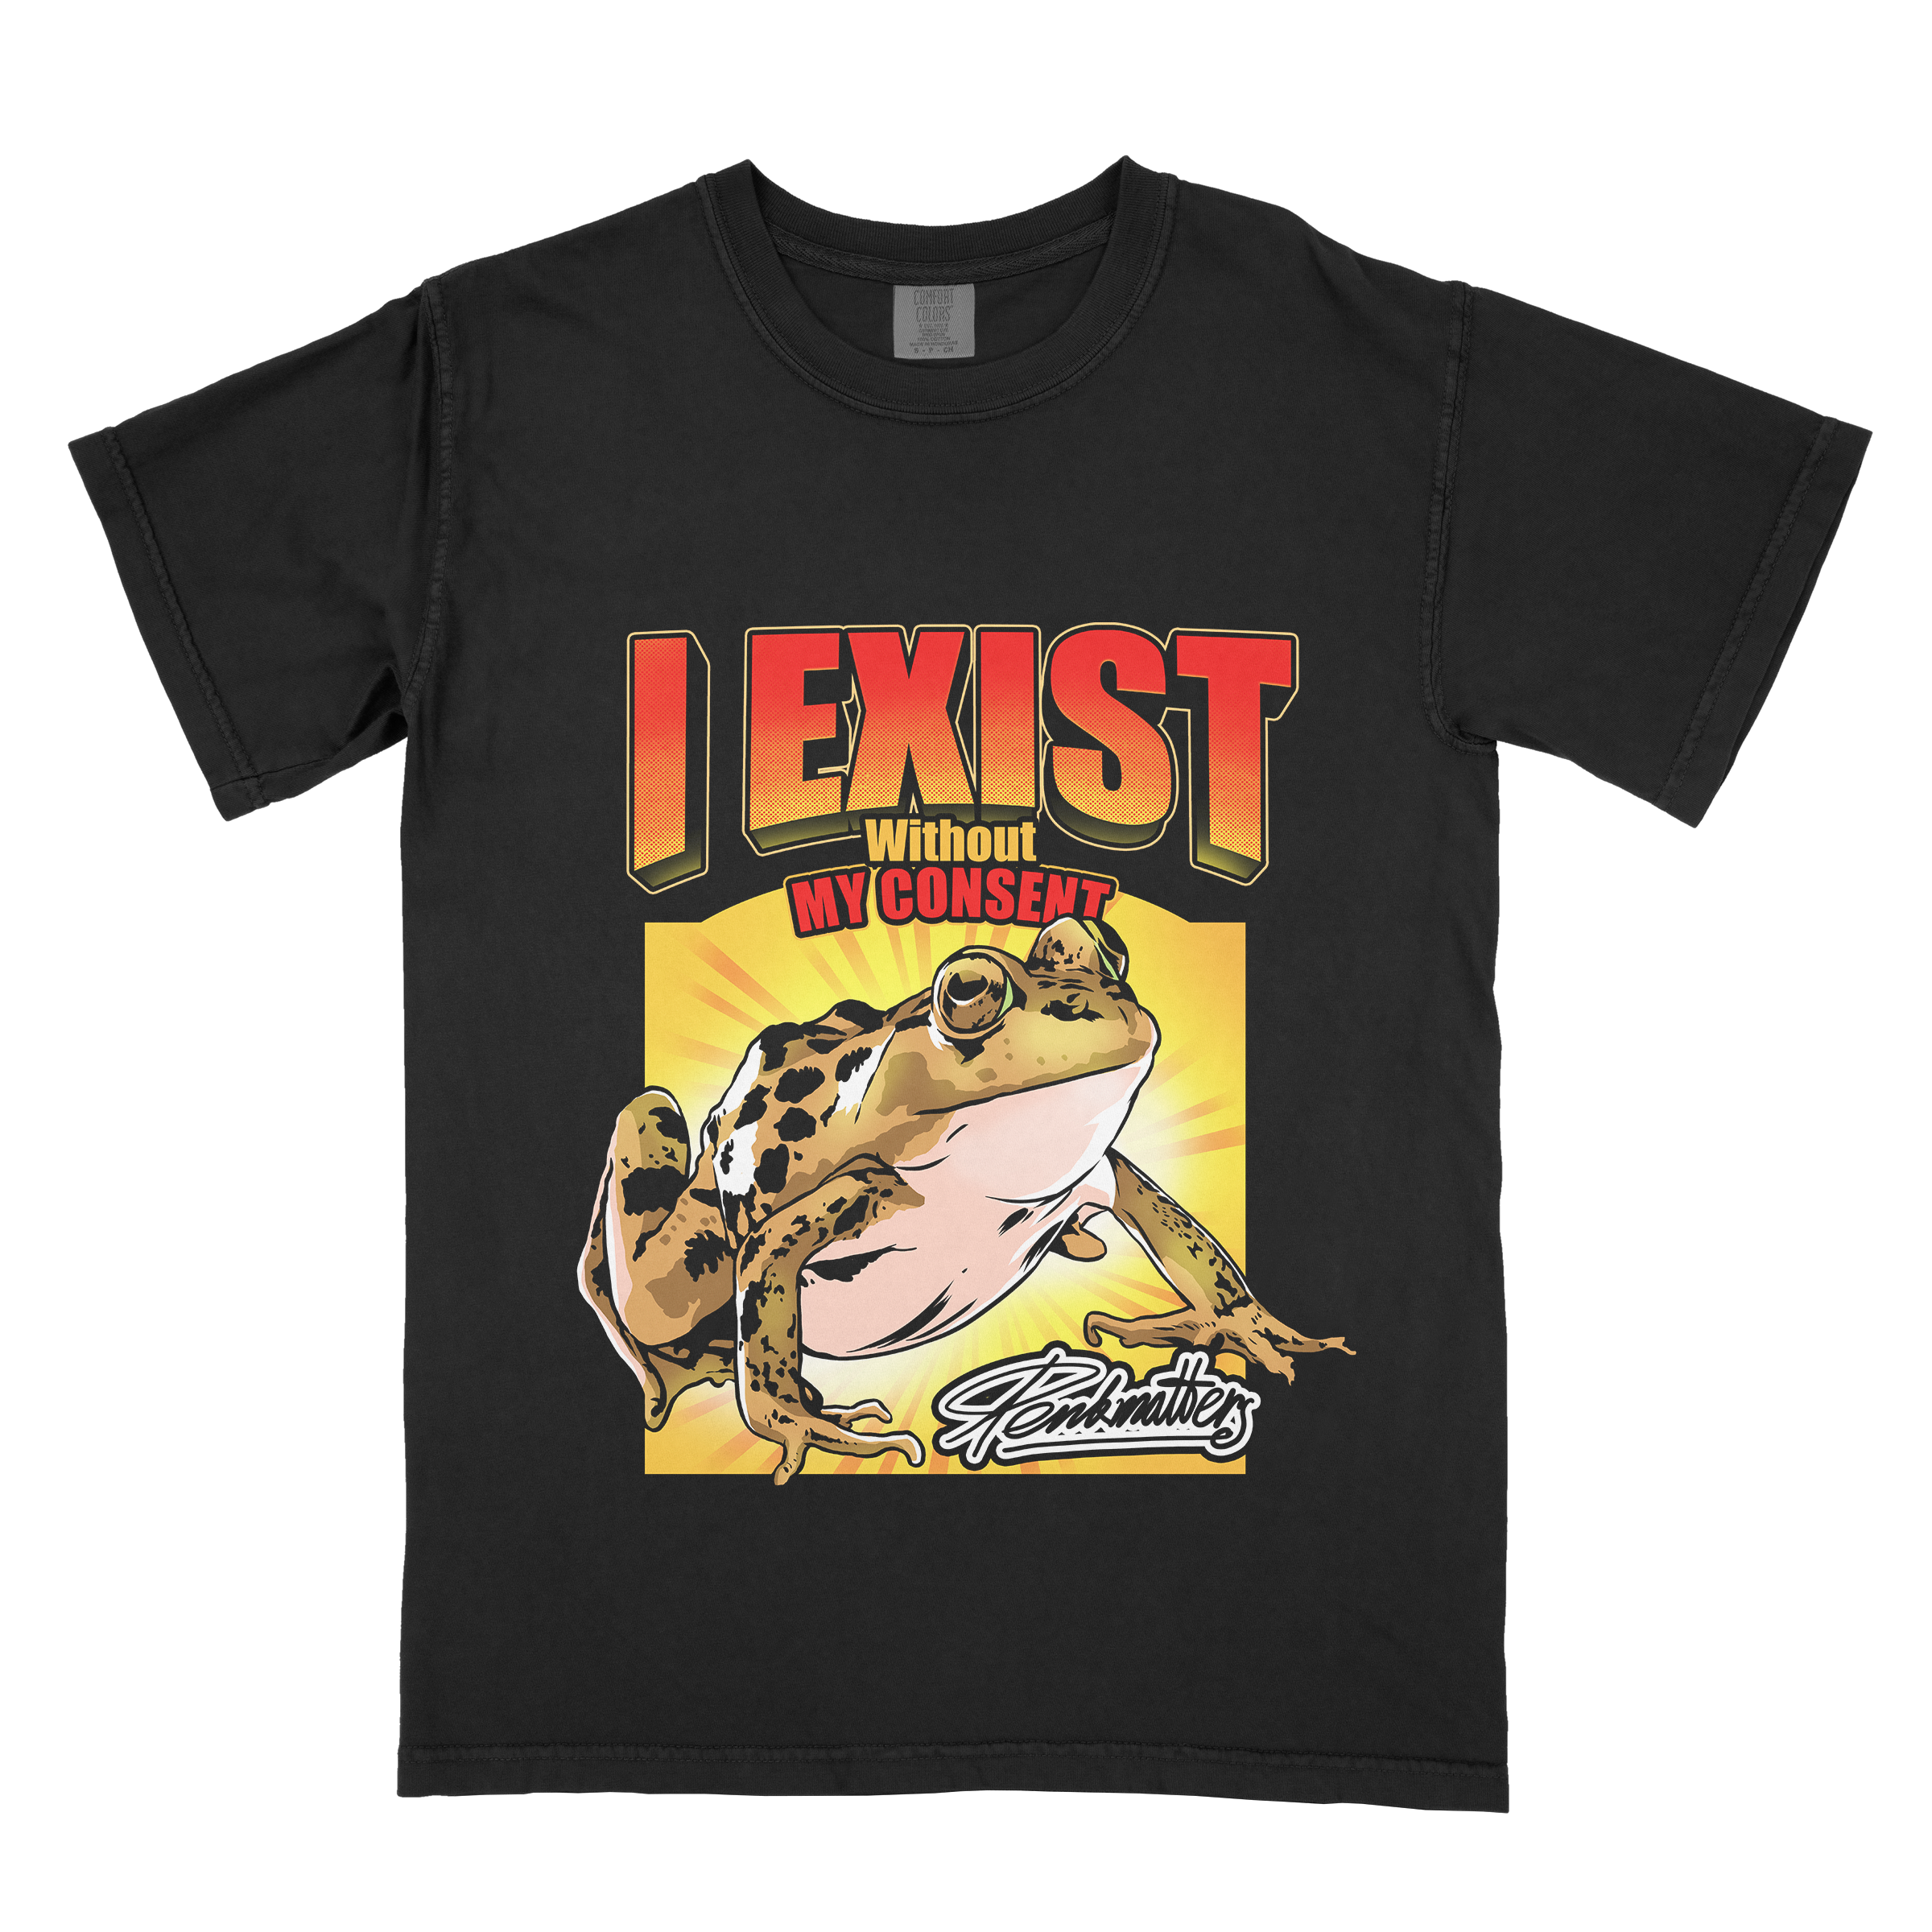 "I Exist Without My Consent" T-Shirt